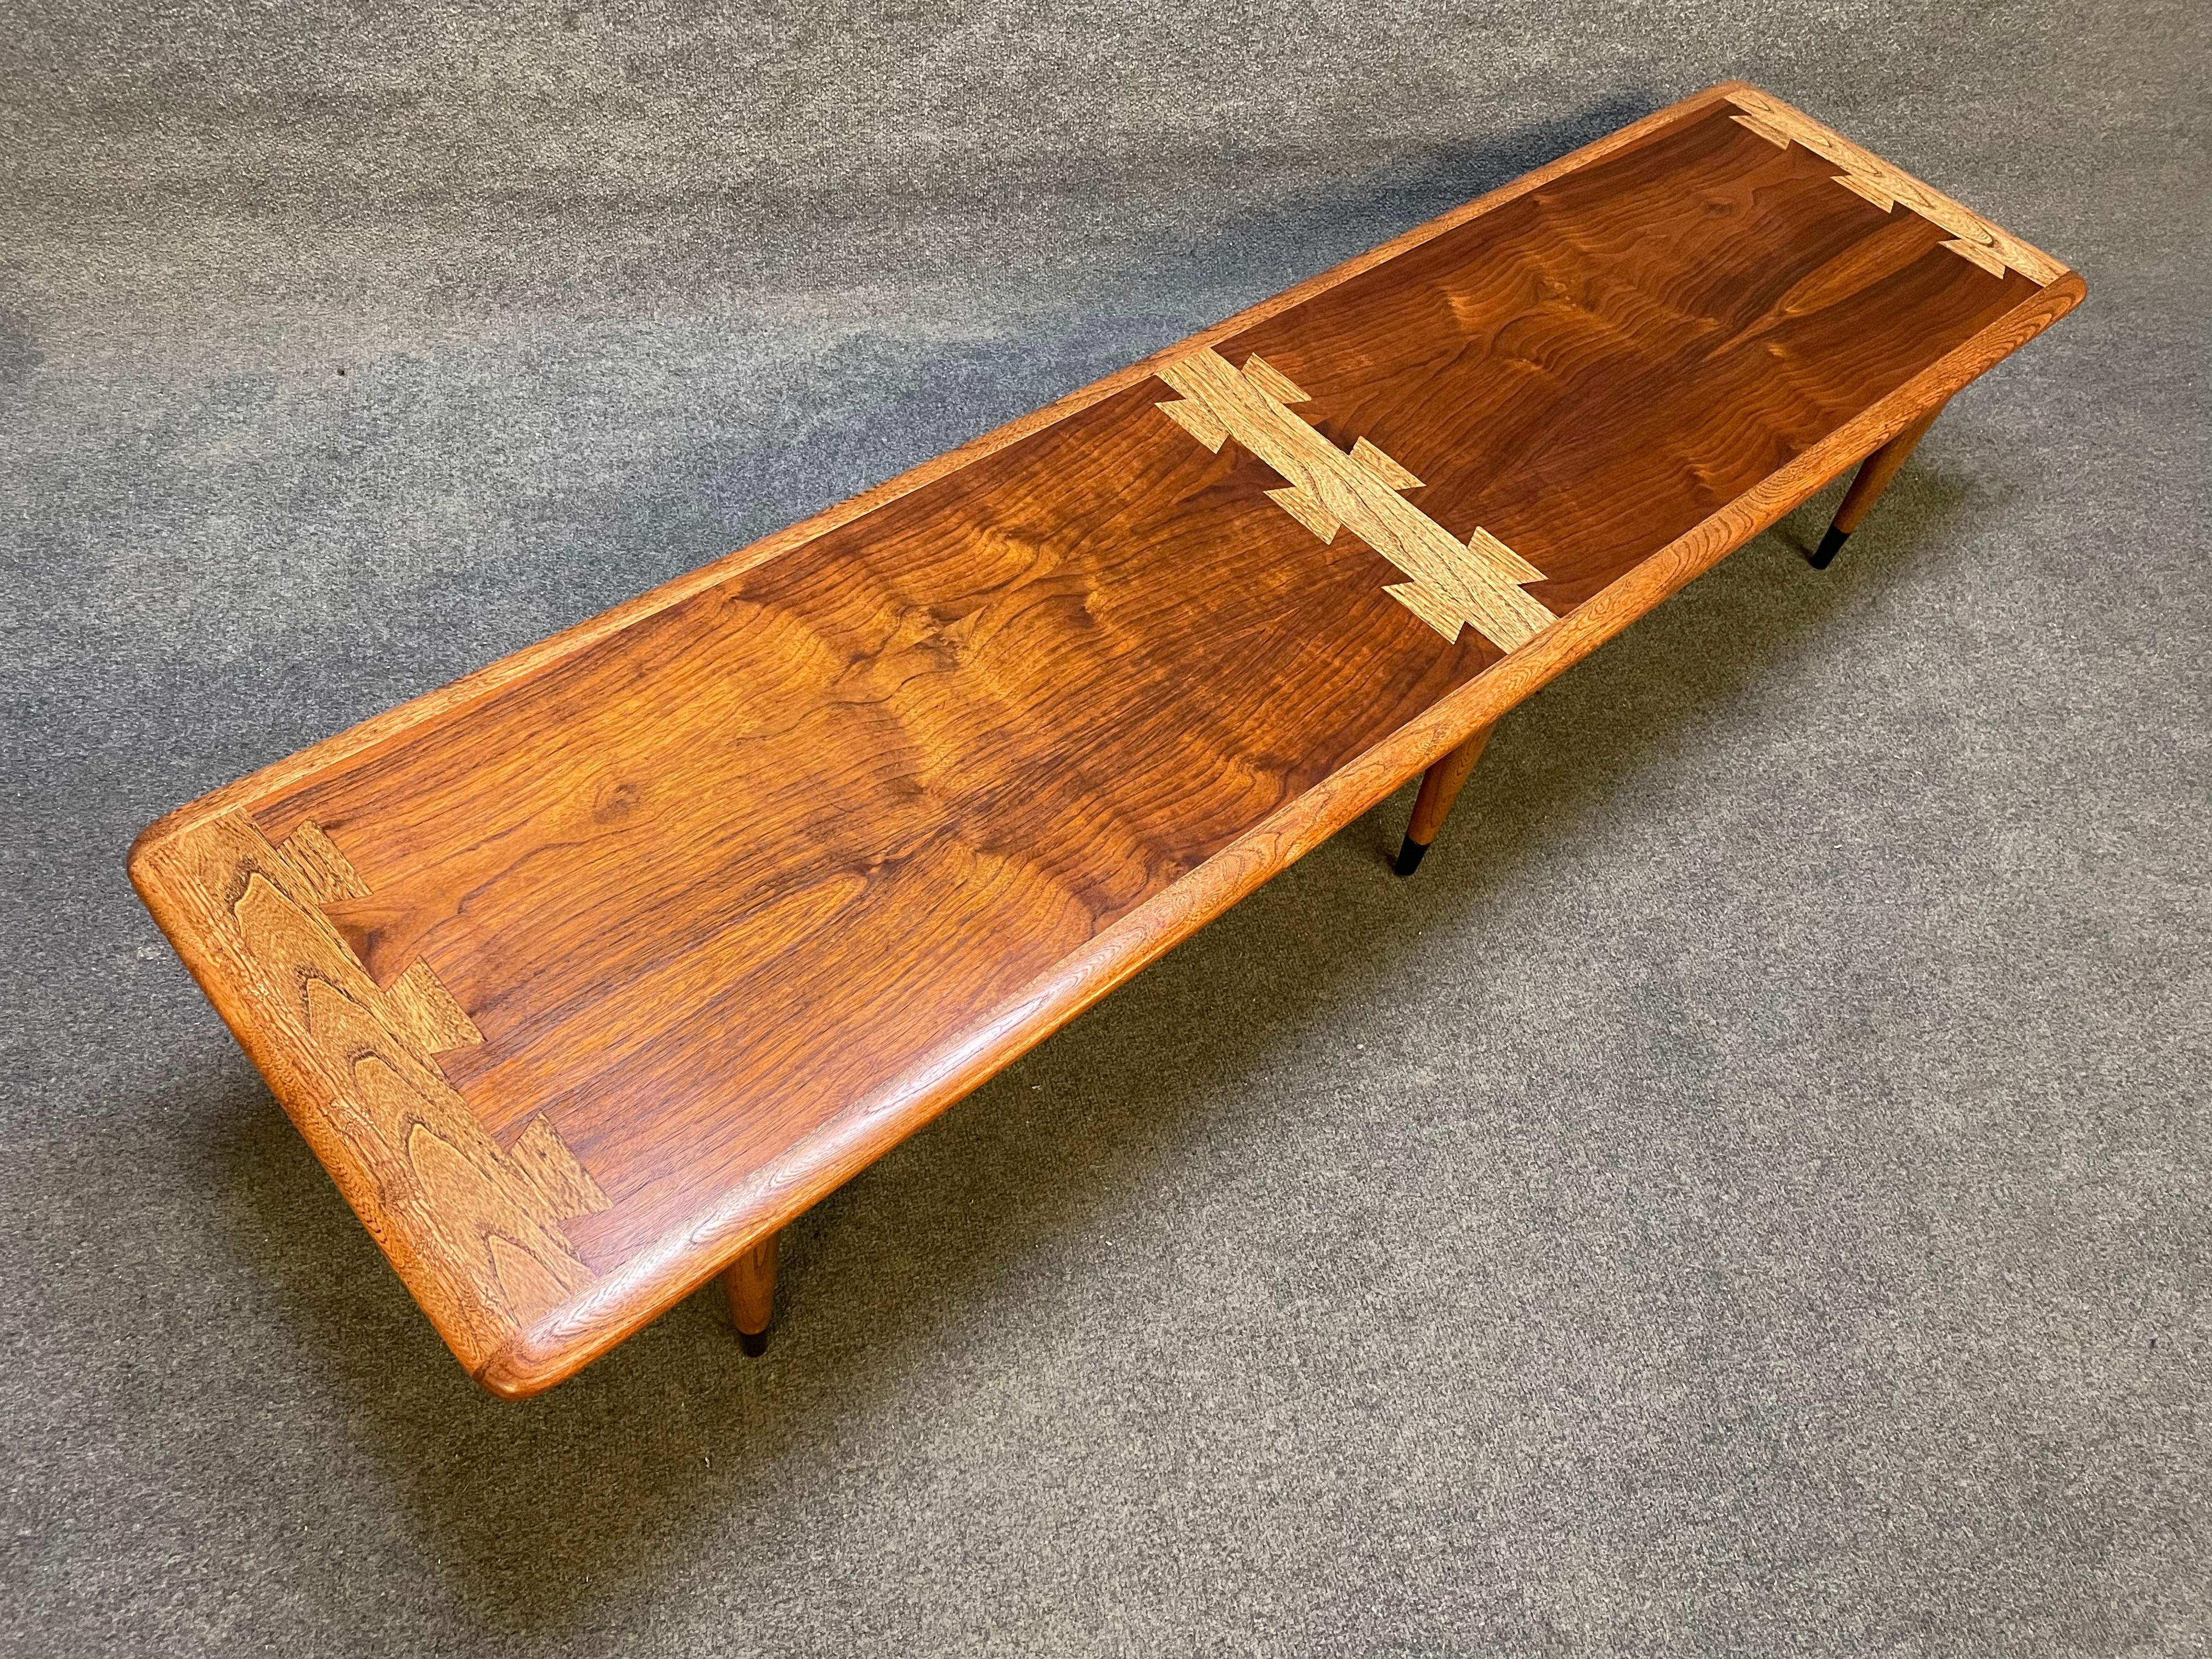 Here is a beautiful Mid-Century Modern coffee table in walnut and oak from the 